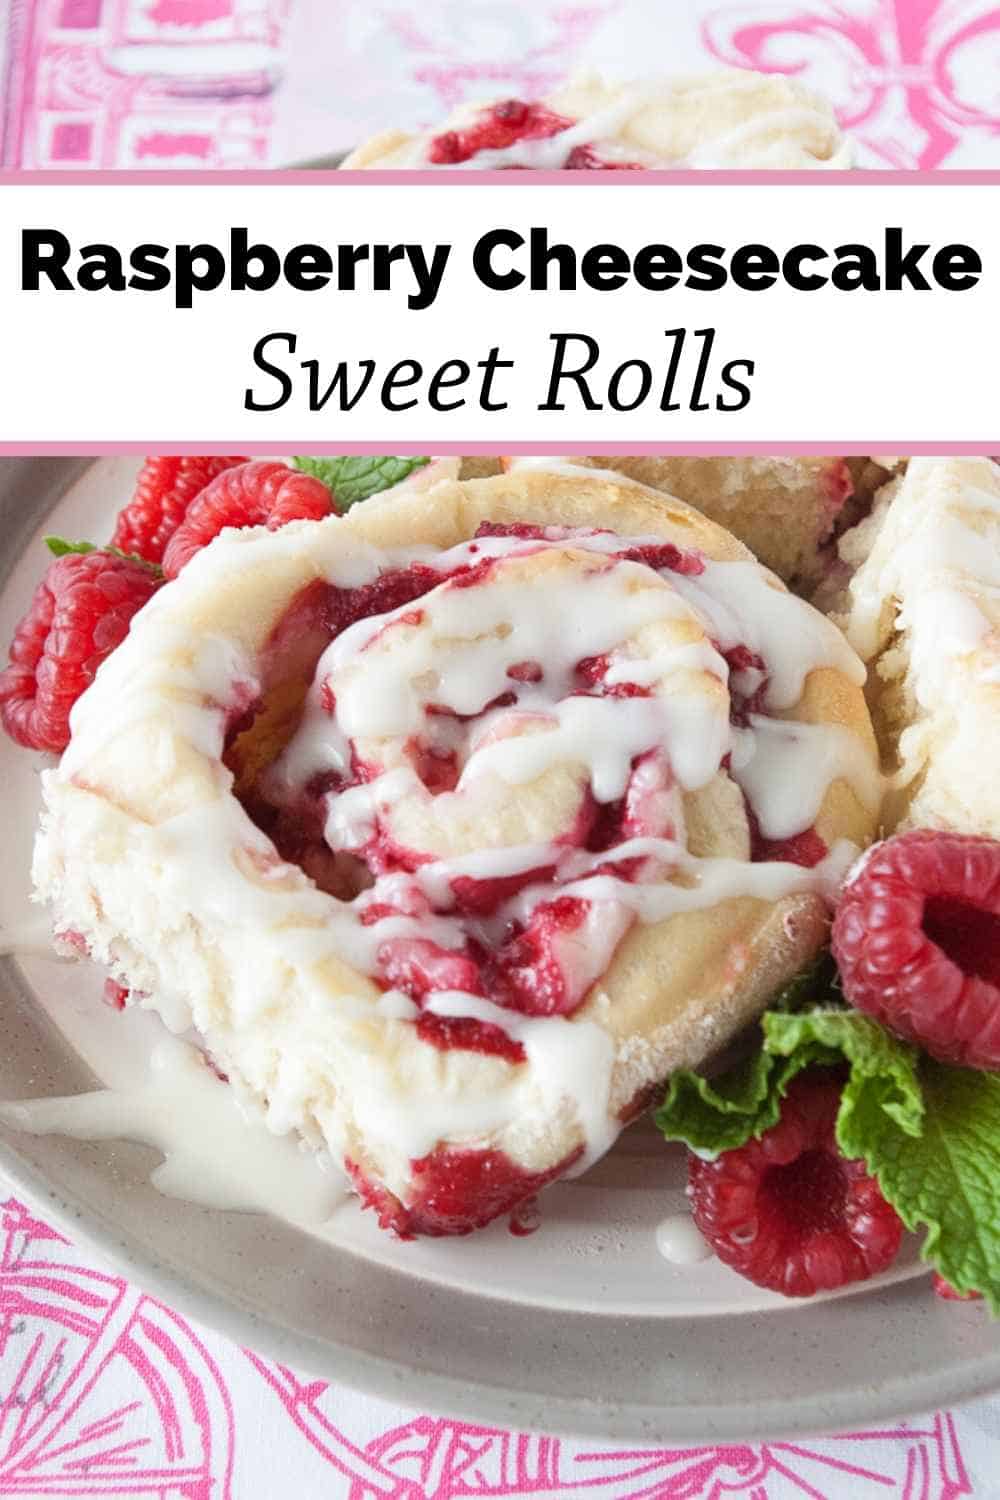 Raspberry Cheesecake Sweet Rolls - Mindee's Cooking Obsession